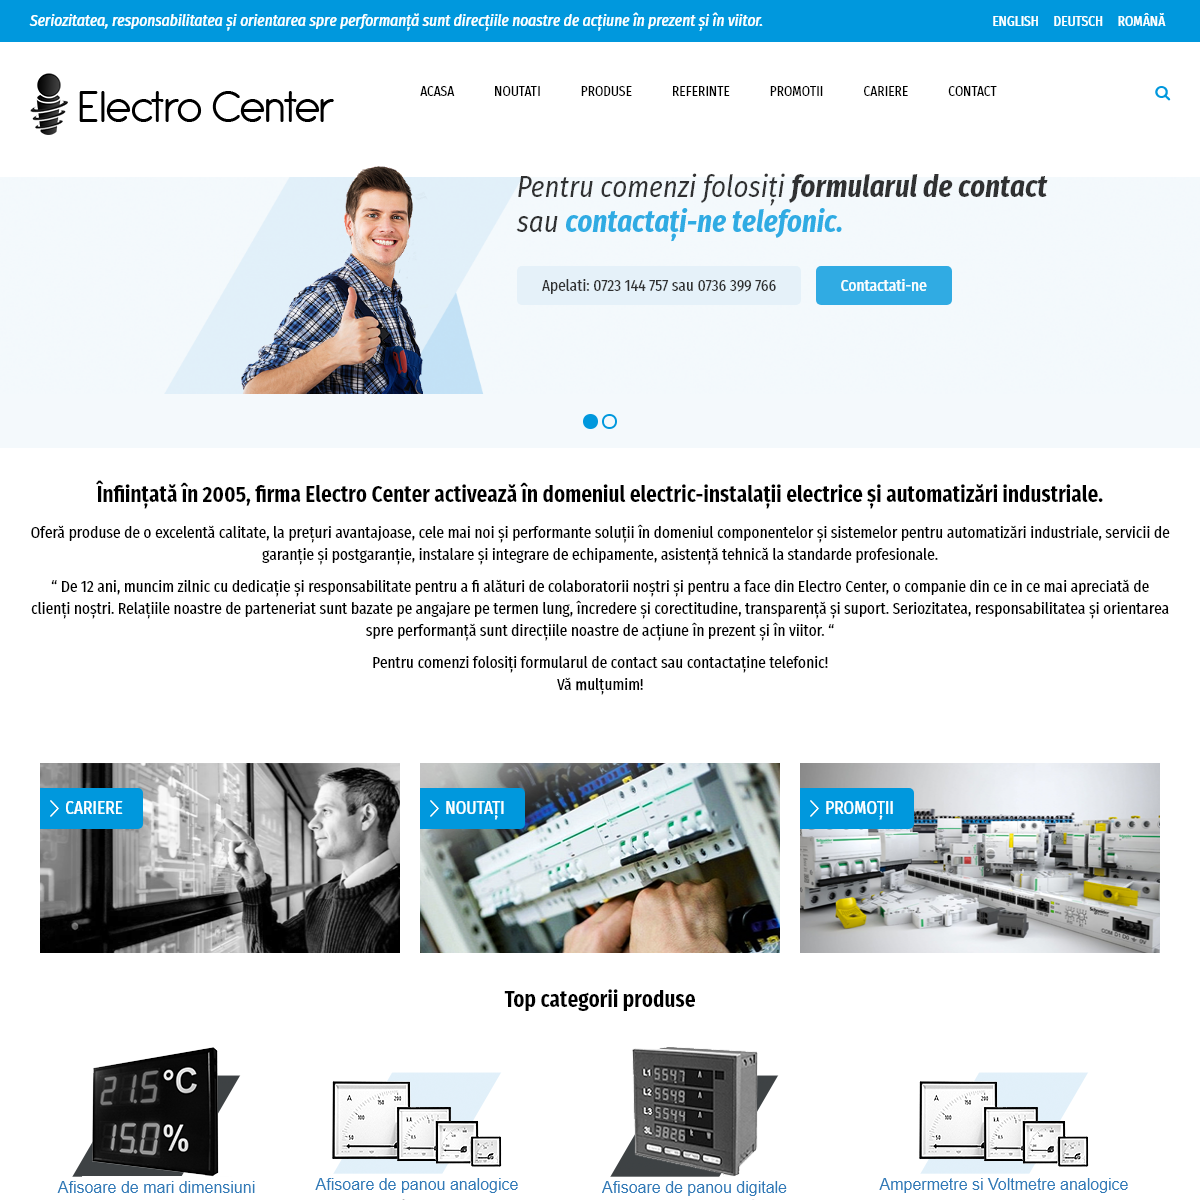 A complete backup of electrocentersm.ro